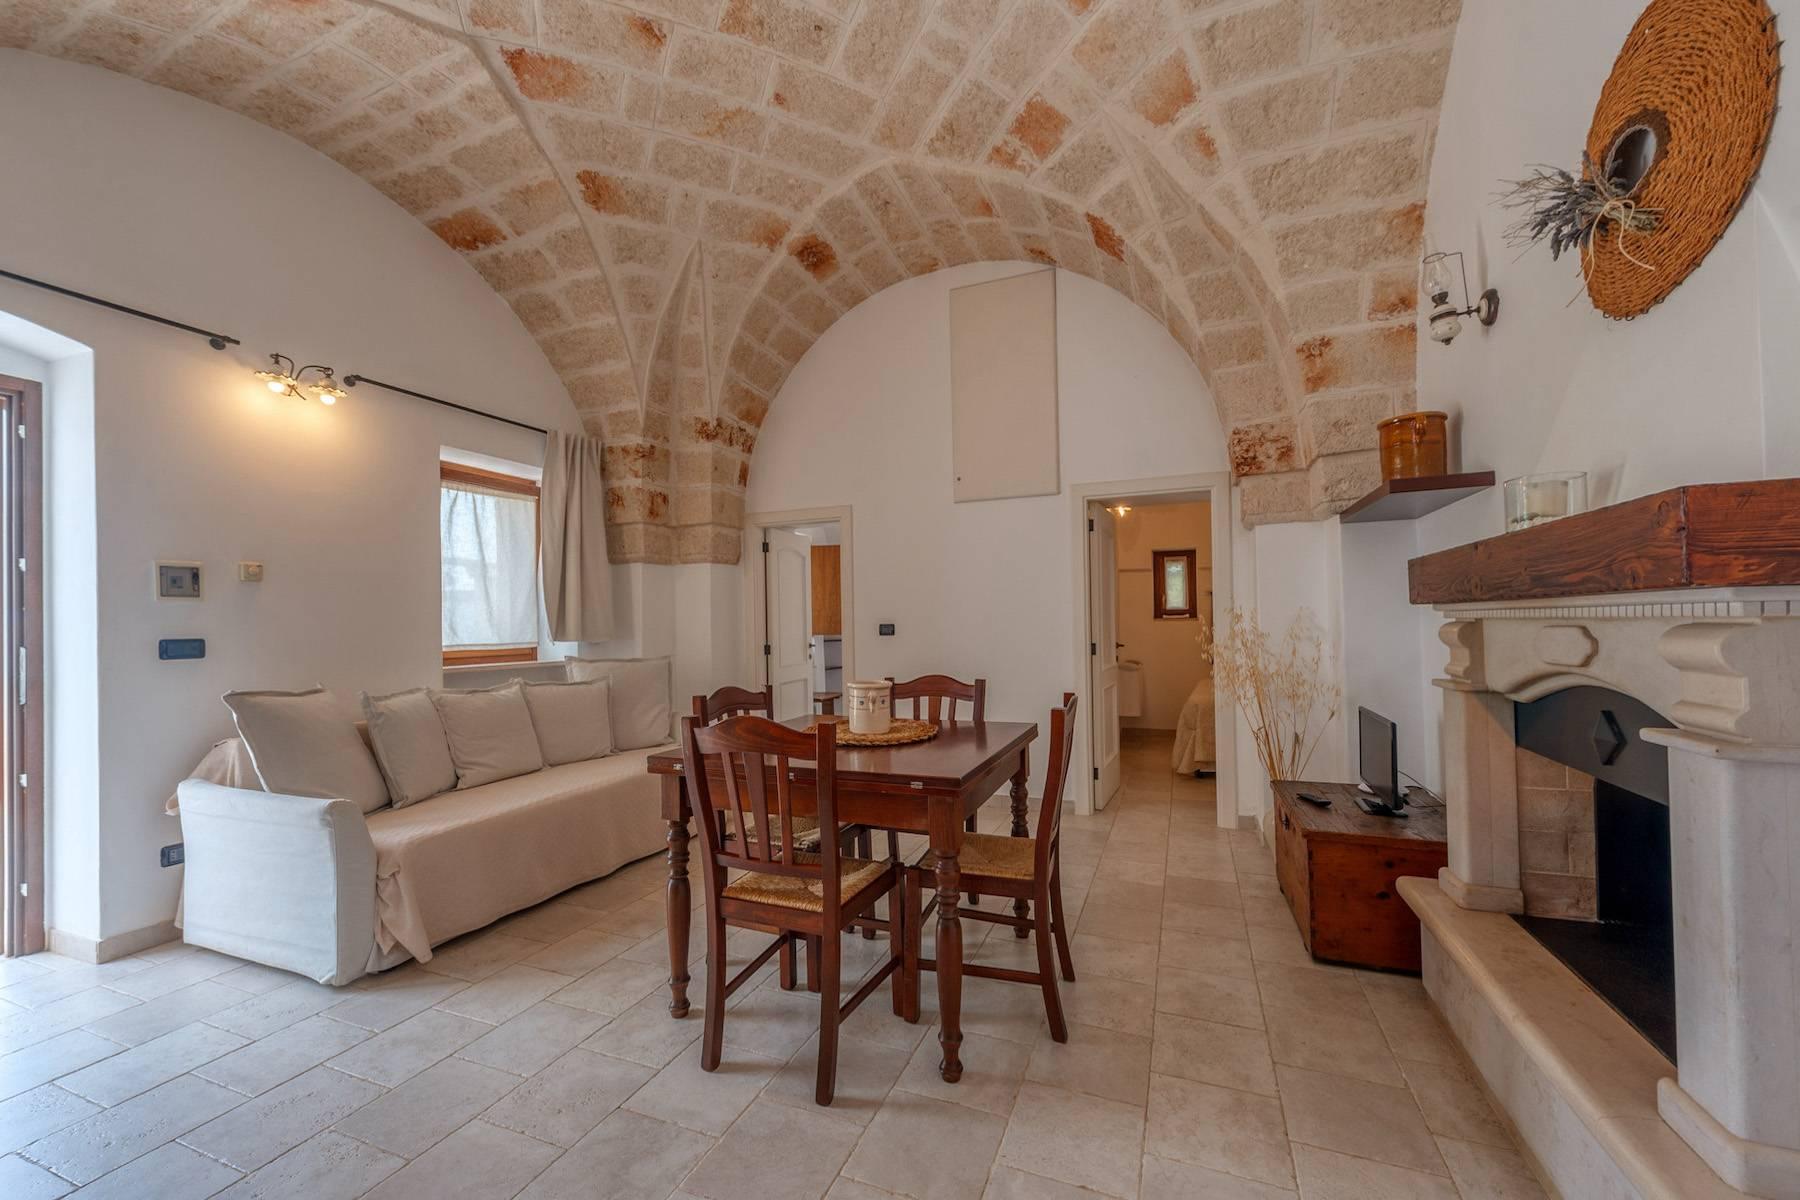 Charming 18th century Masseria surrounded by centuries-old olive trees - 18